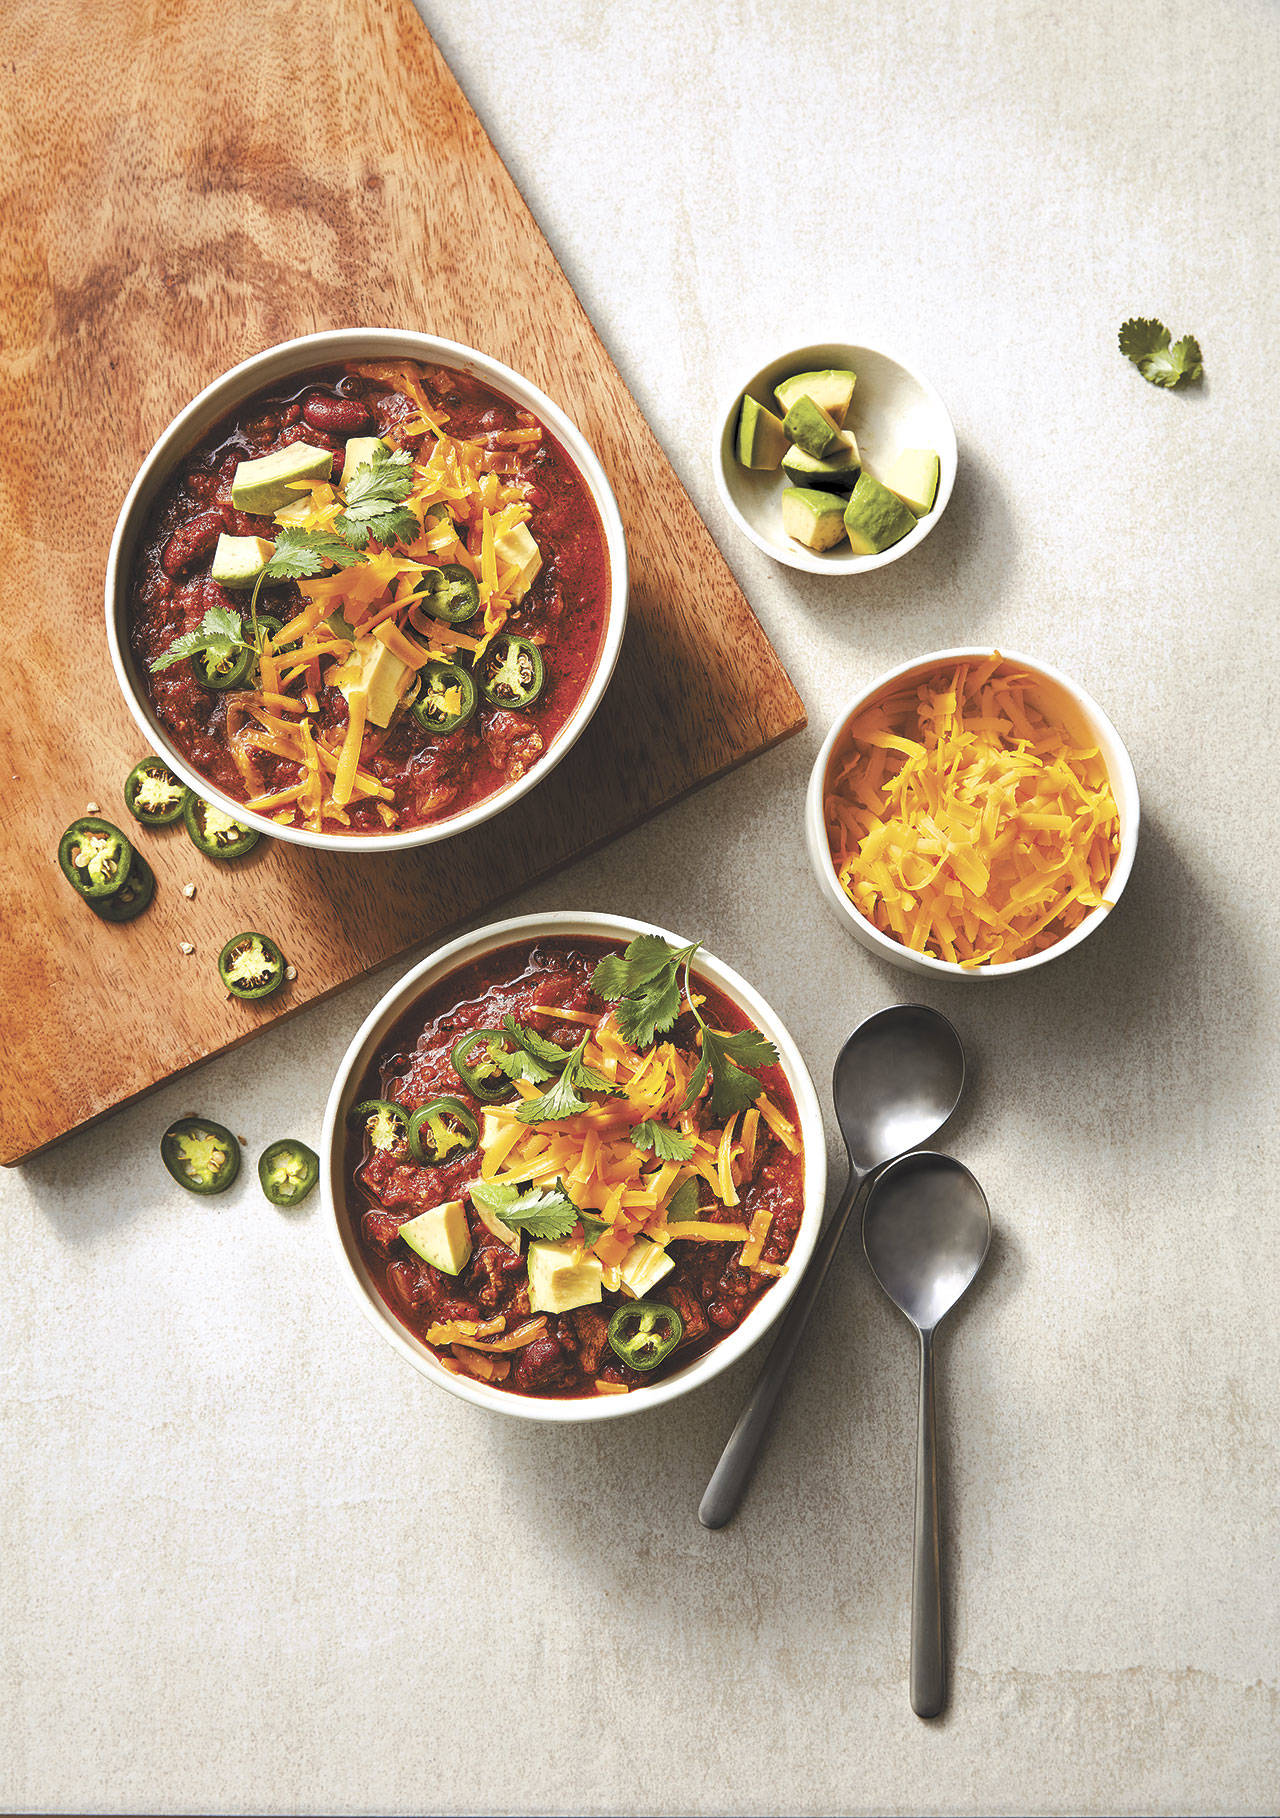 Serve slow cooker beef and bean chili topped with avocado, jalapeno slices, shredded cheddar and cilantro. (Greg Dupree)